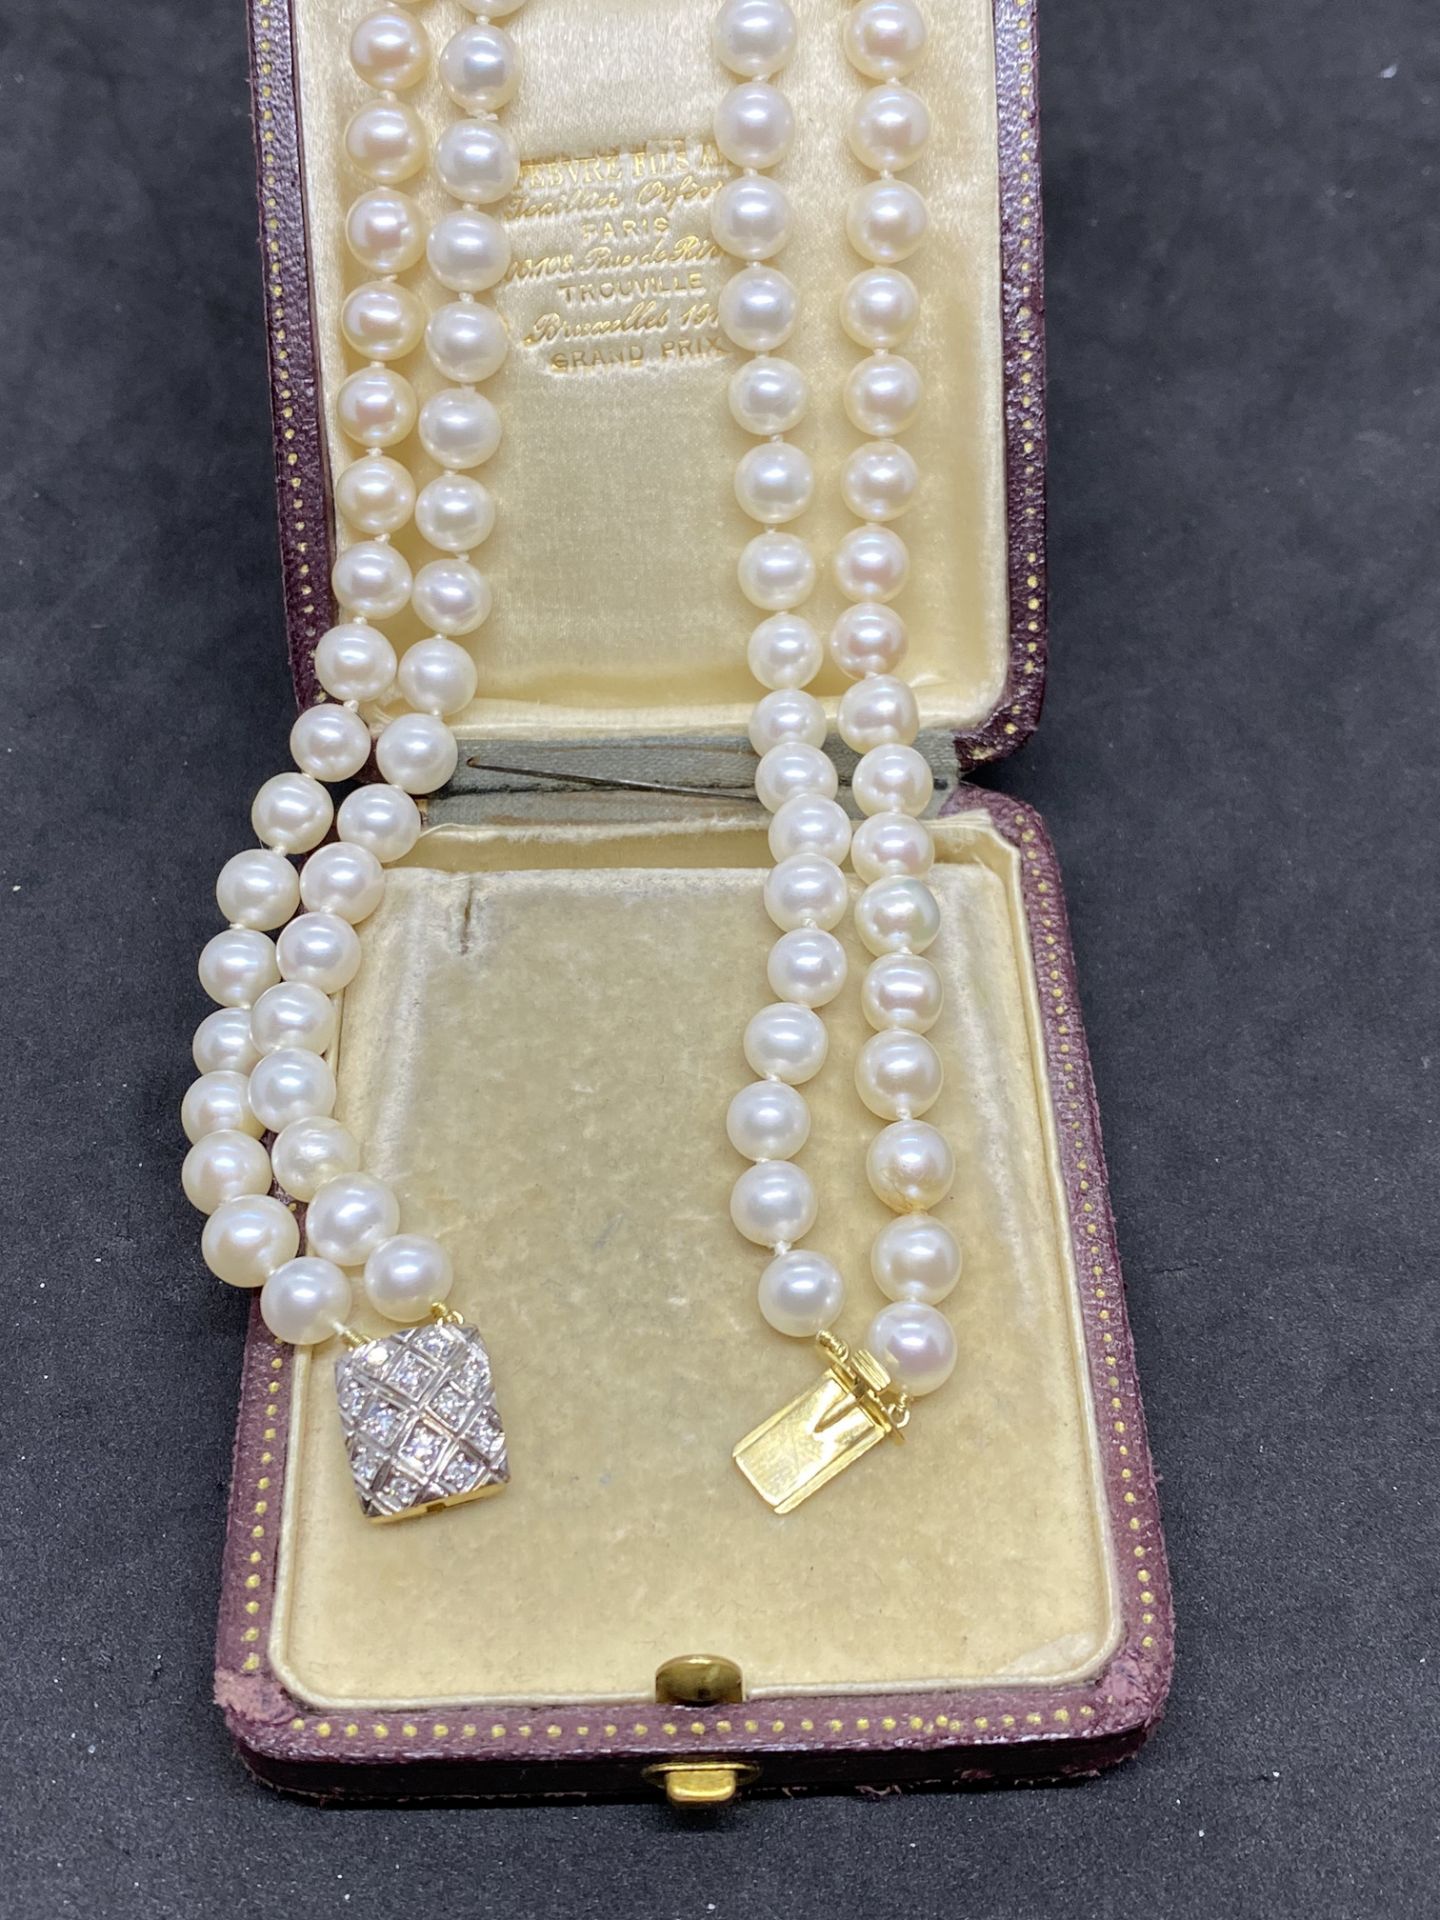 CULTURED PEARL NECKLACE WITH 18ct GOLD CLASP - Image 6 of 6